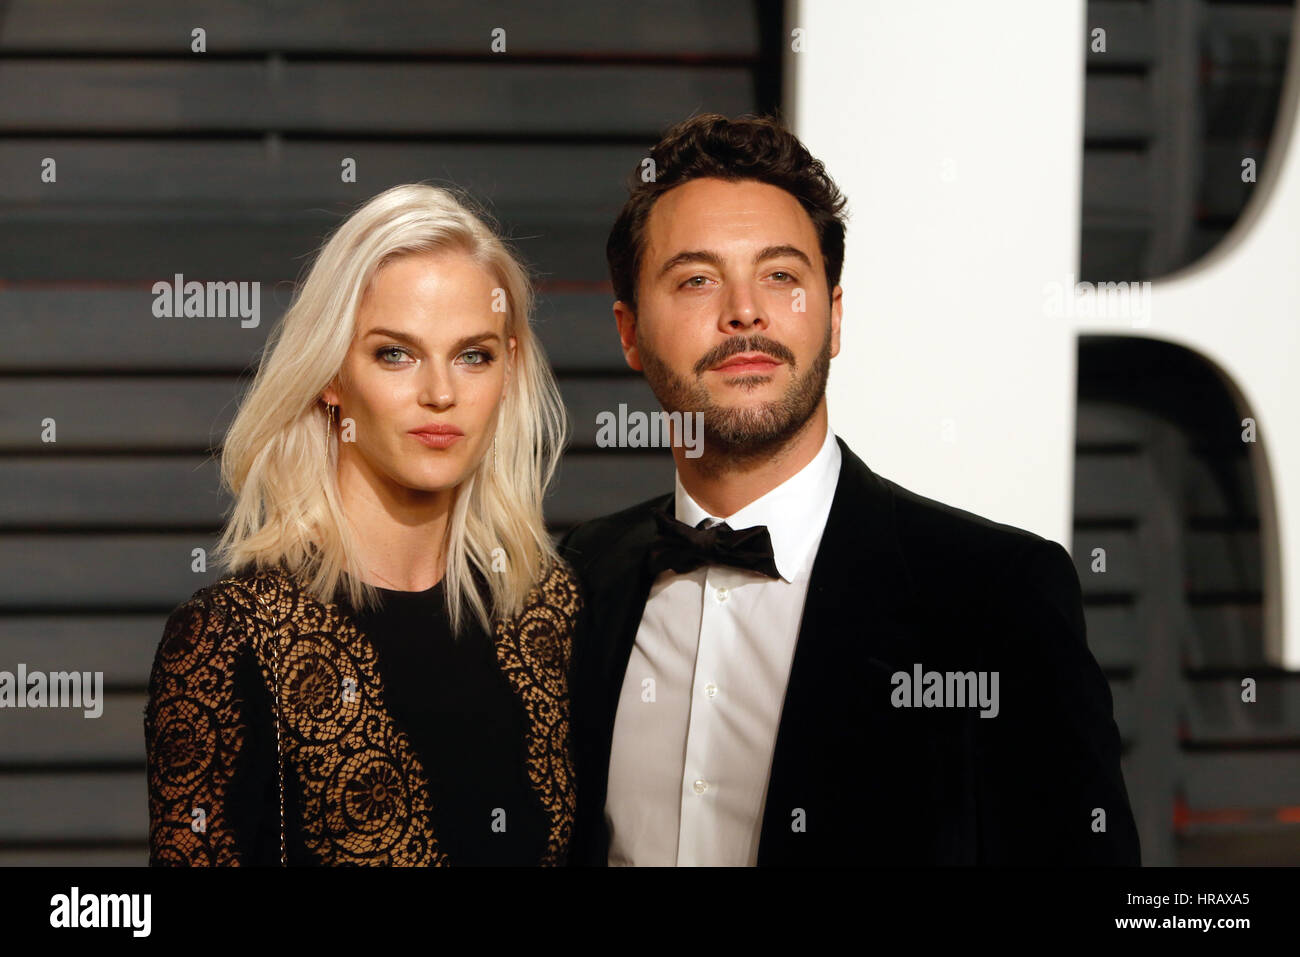 Beverly Hills, Us. 26th Feb, 2017. Shannan Click and Jack Huston arrive at the Vanity Fair Oscar Party at Wallis Annenberg Center for the Performing Arts in Beverly Hills, Los Angeles, USA, on 26 February 2017. Photo: Hubert Boesl - NO WIRE SERVICE - Photo: Hubert Boesl/dpa/Alamy Live News Stock Photo